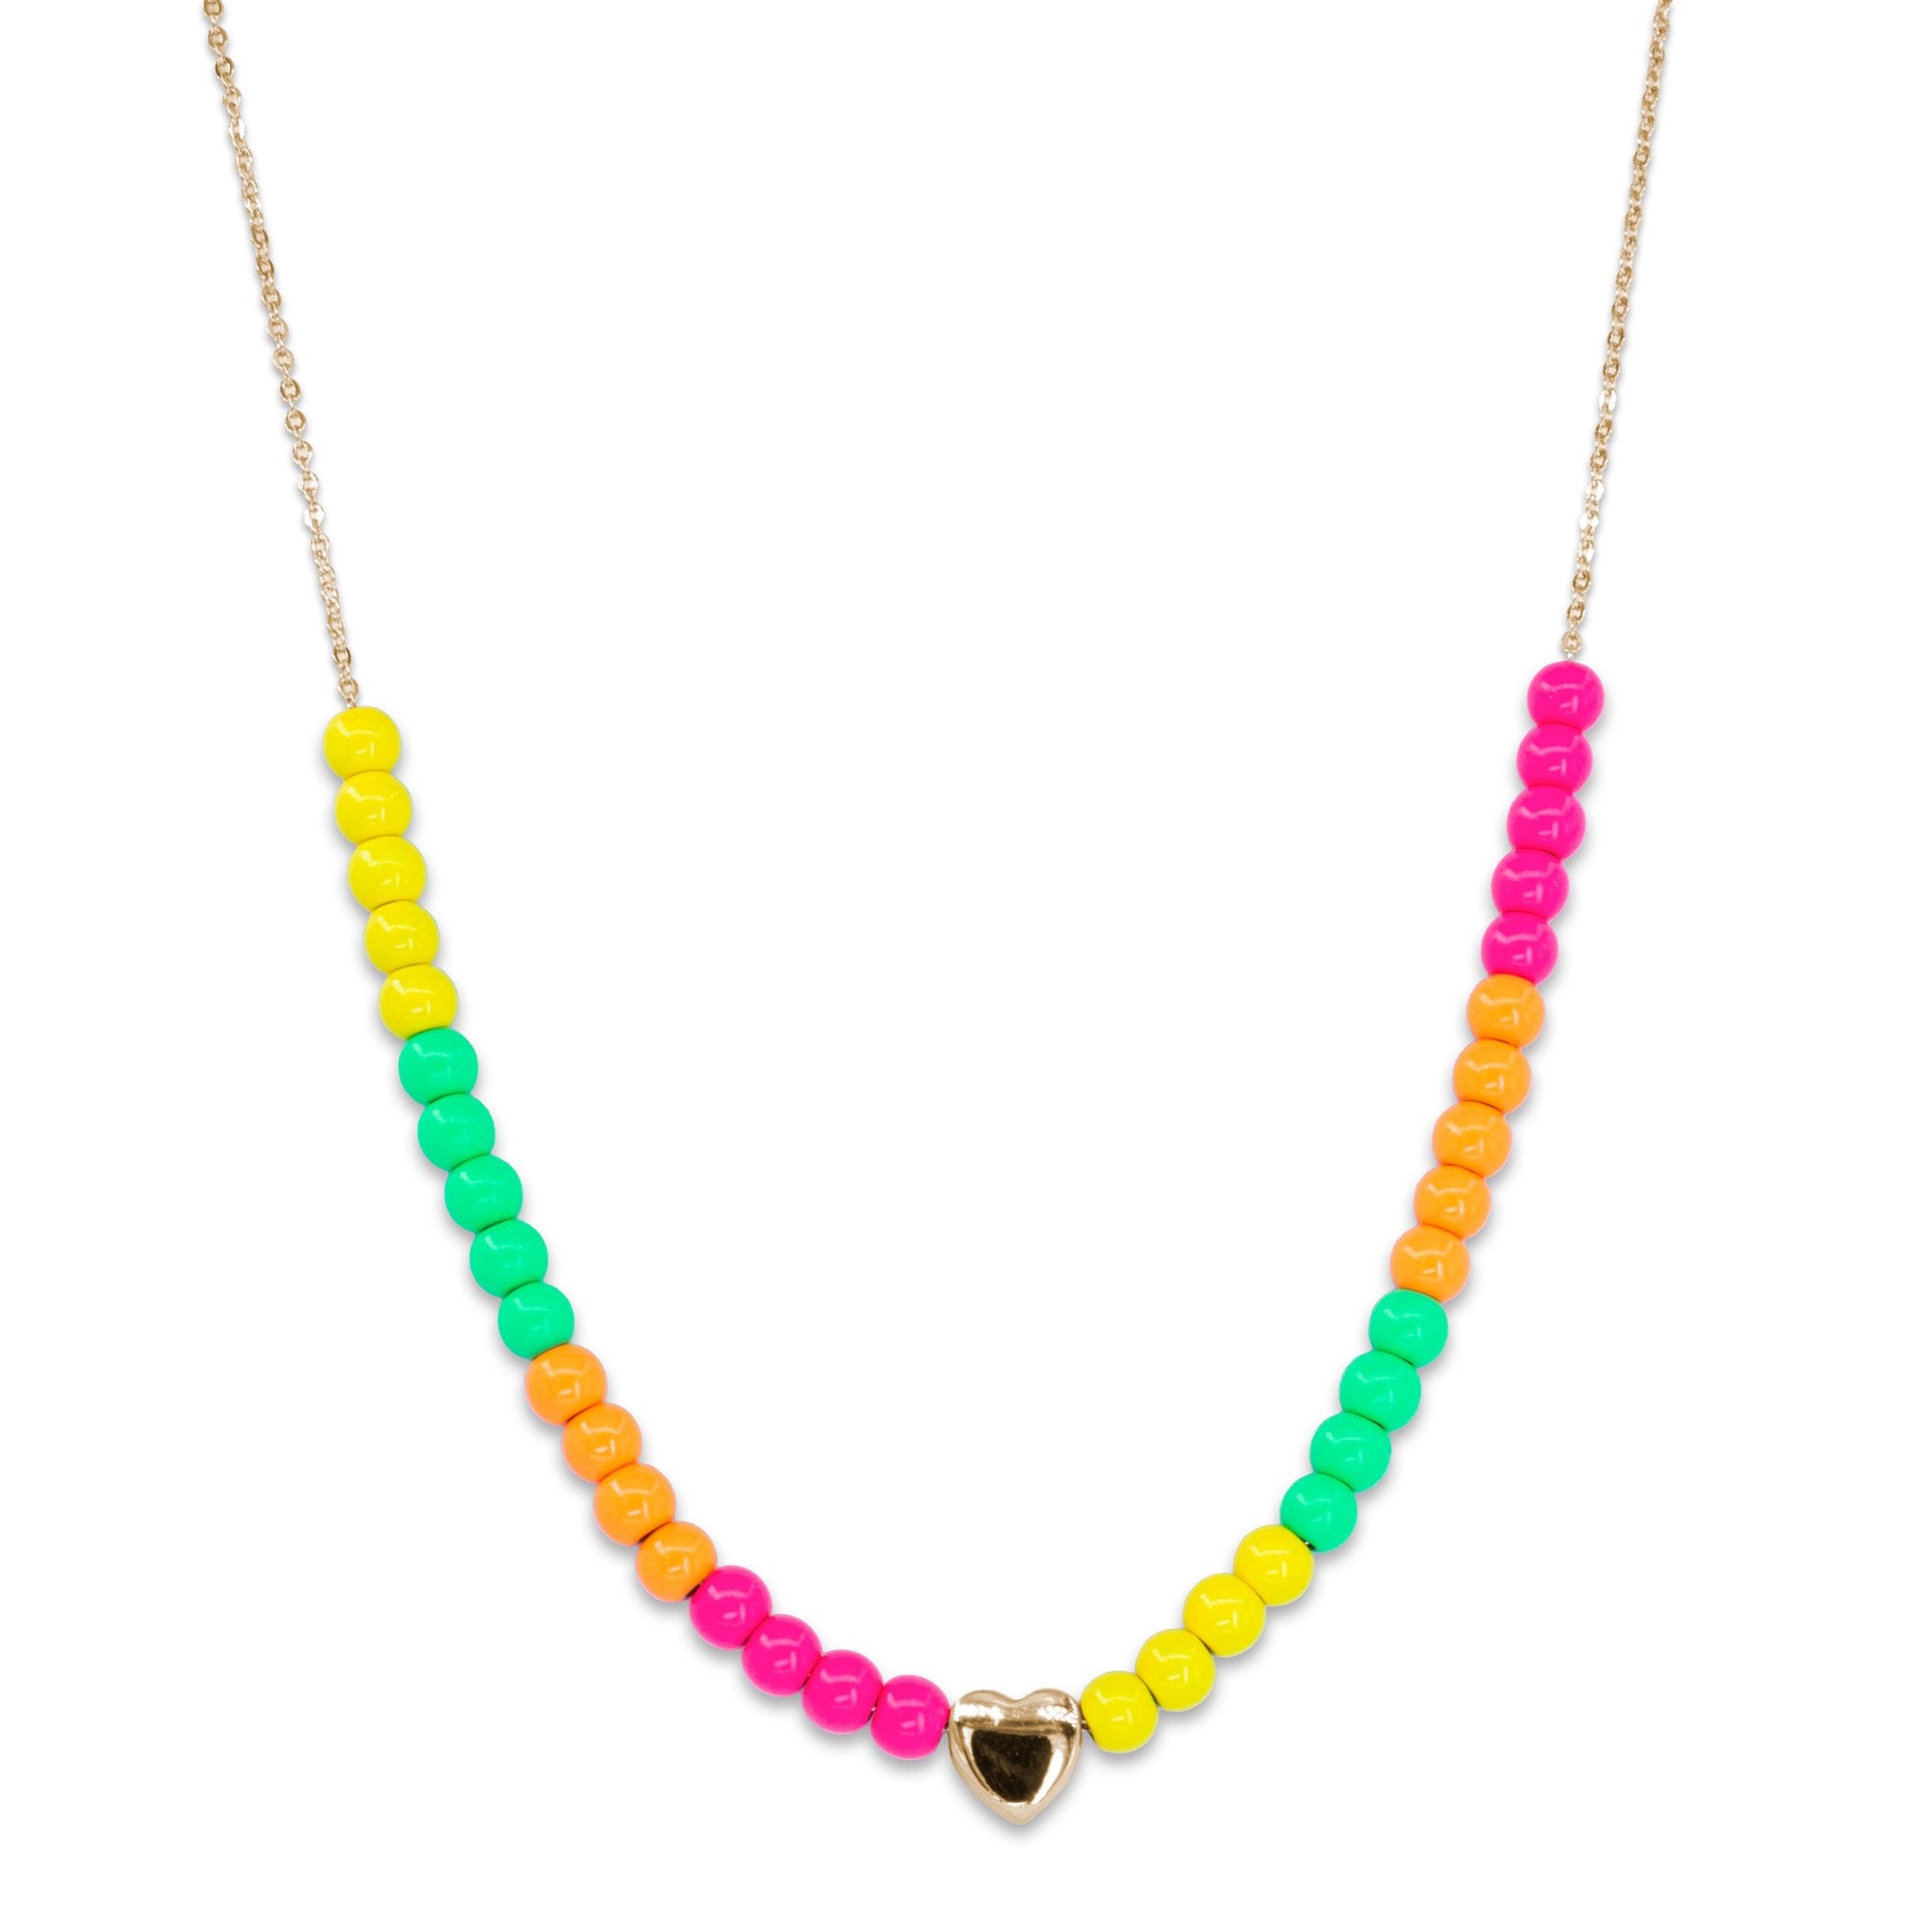 4mm Gold Neon Bead Necklace